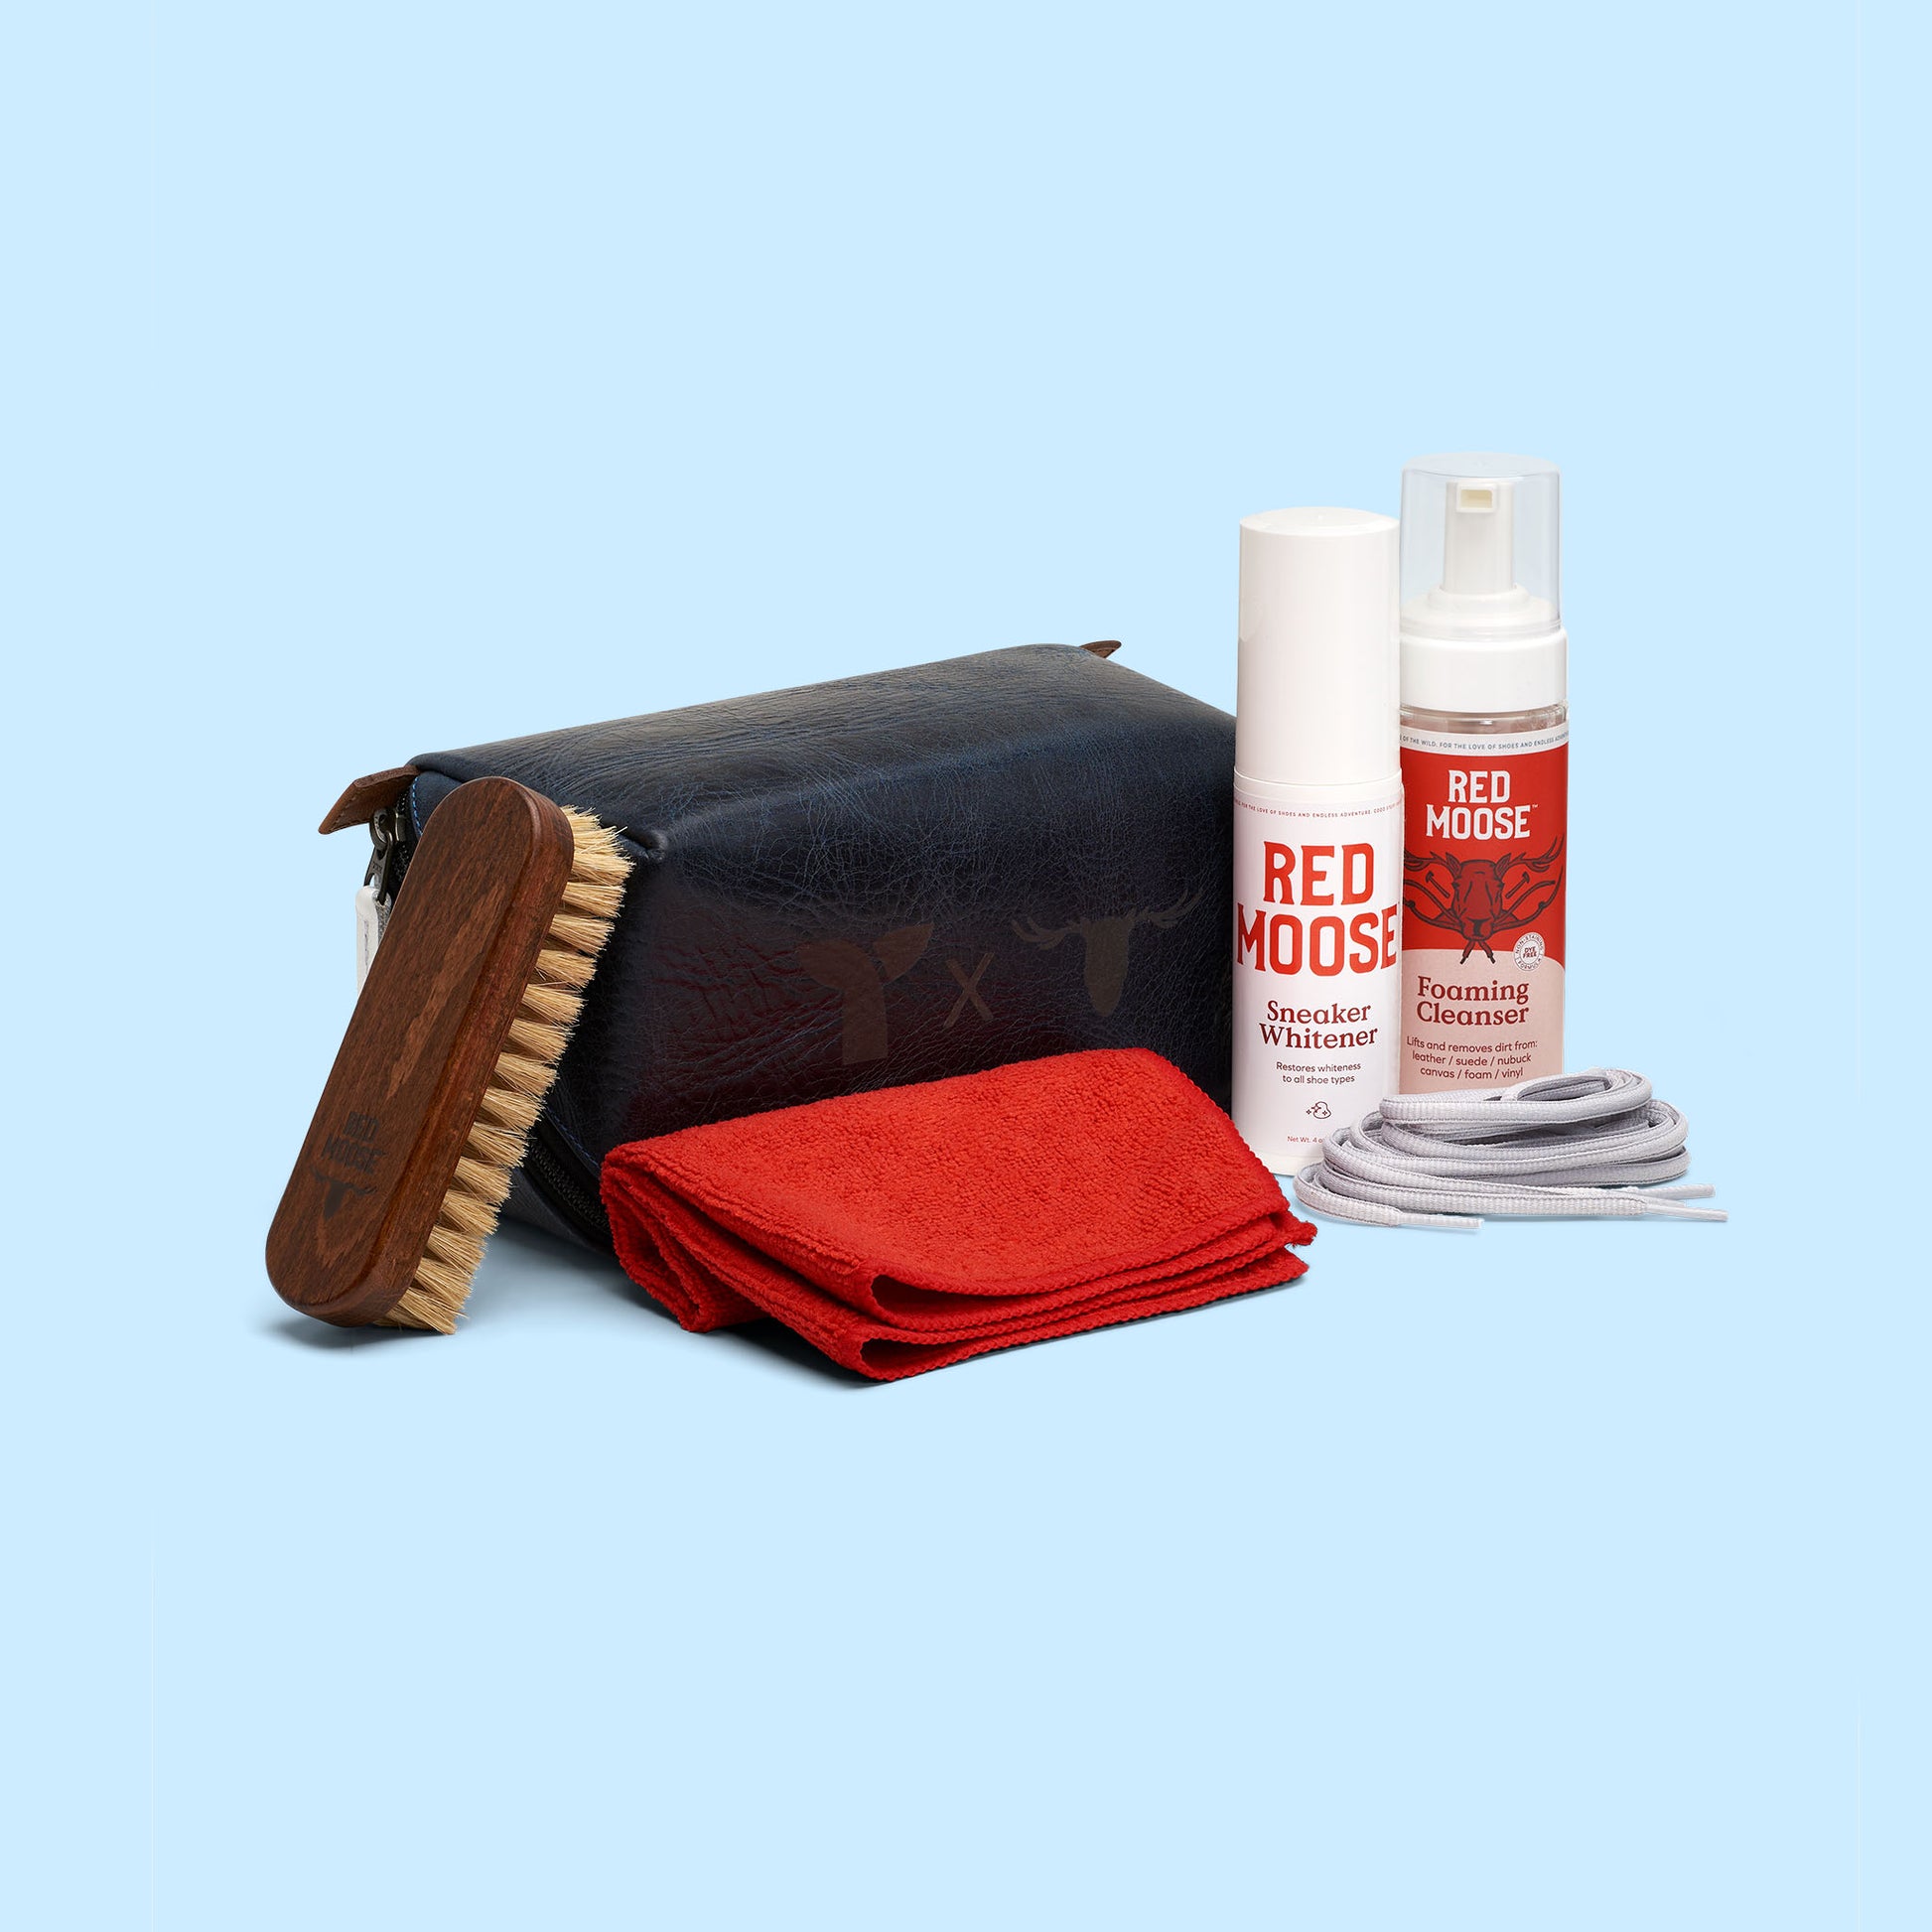 All-In-One Sneaker Care Kit